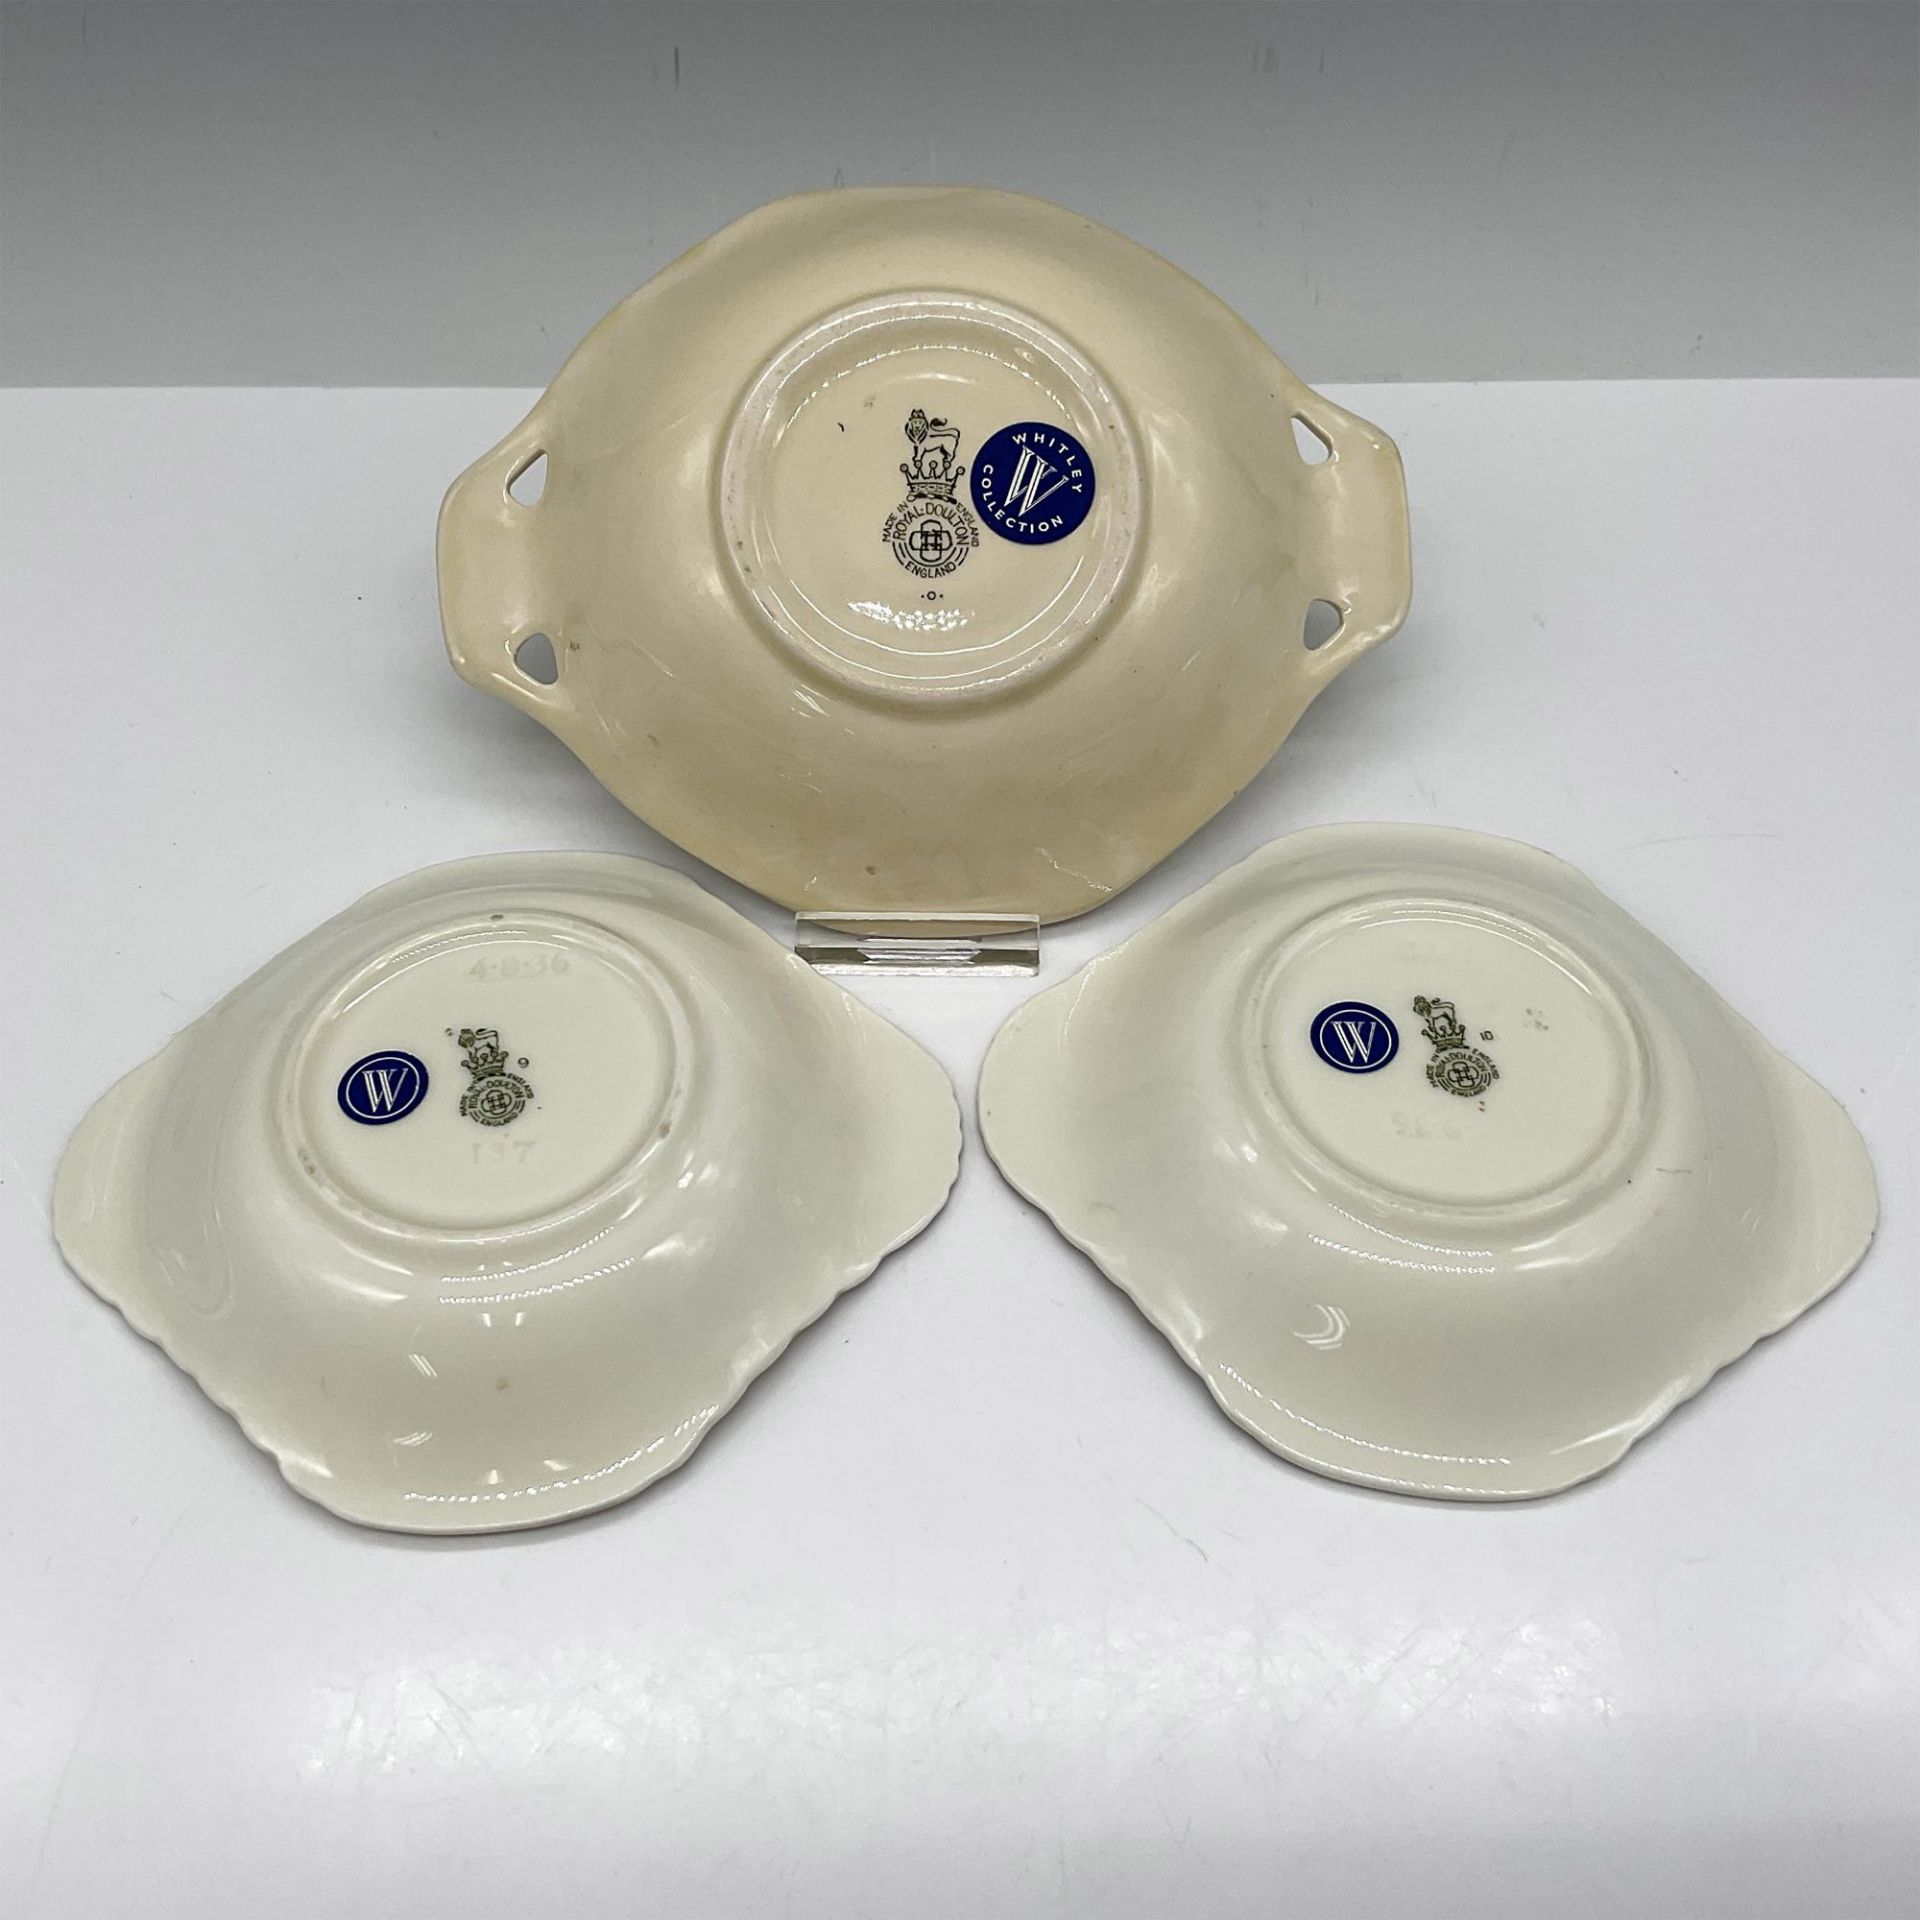 3pc Royal Doulton Porcelain Series Ware Dog's Head Dishes - Image 3 of 3